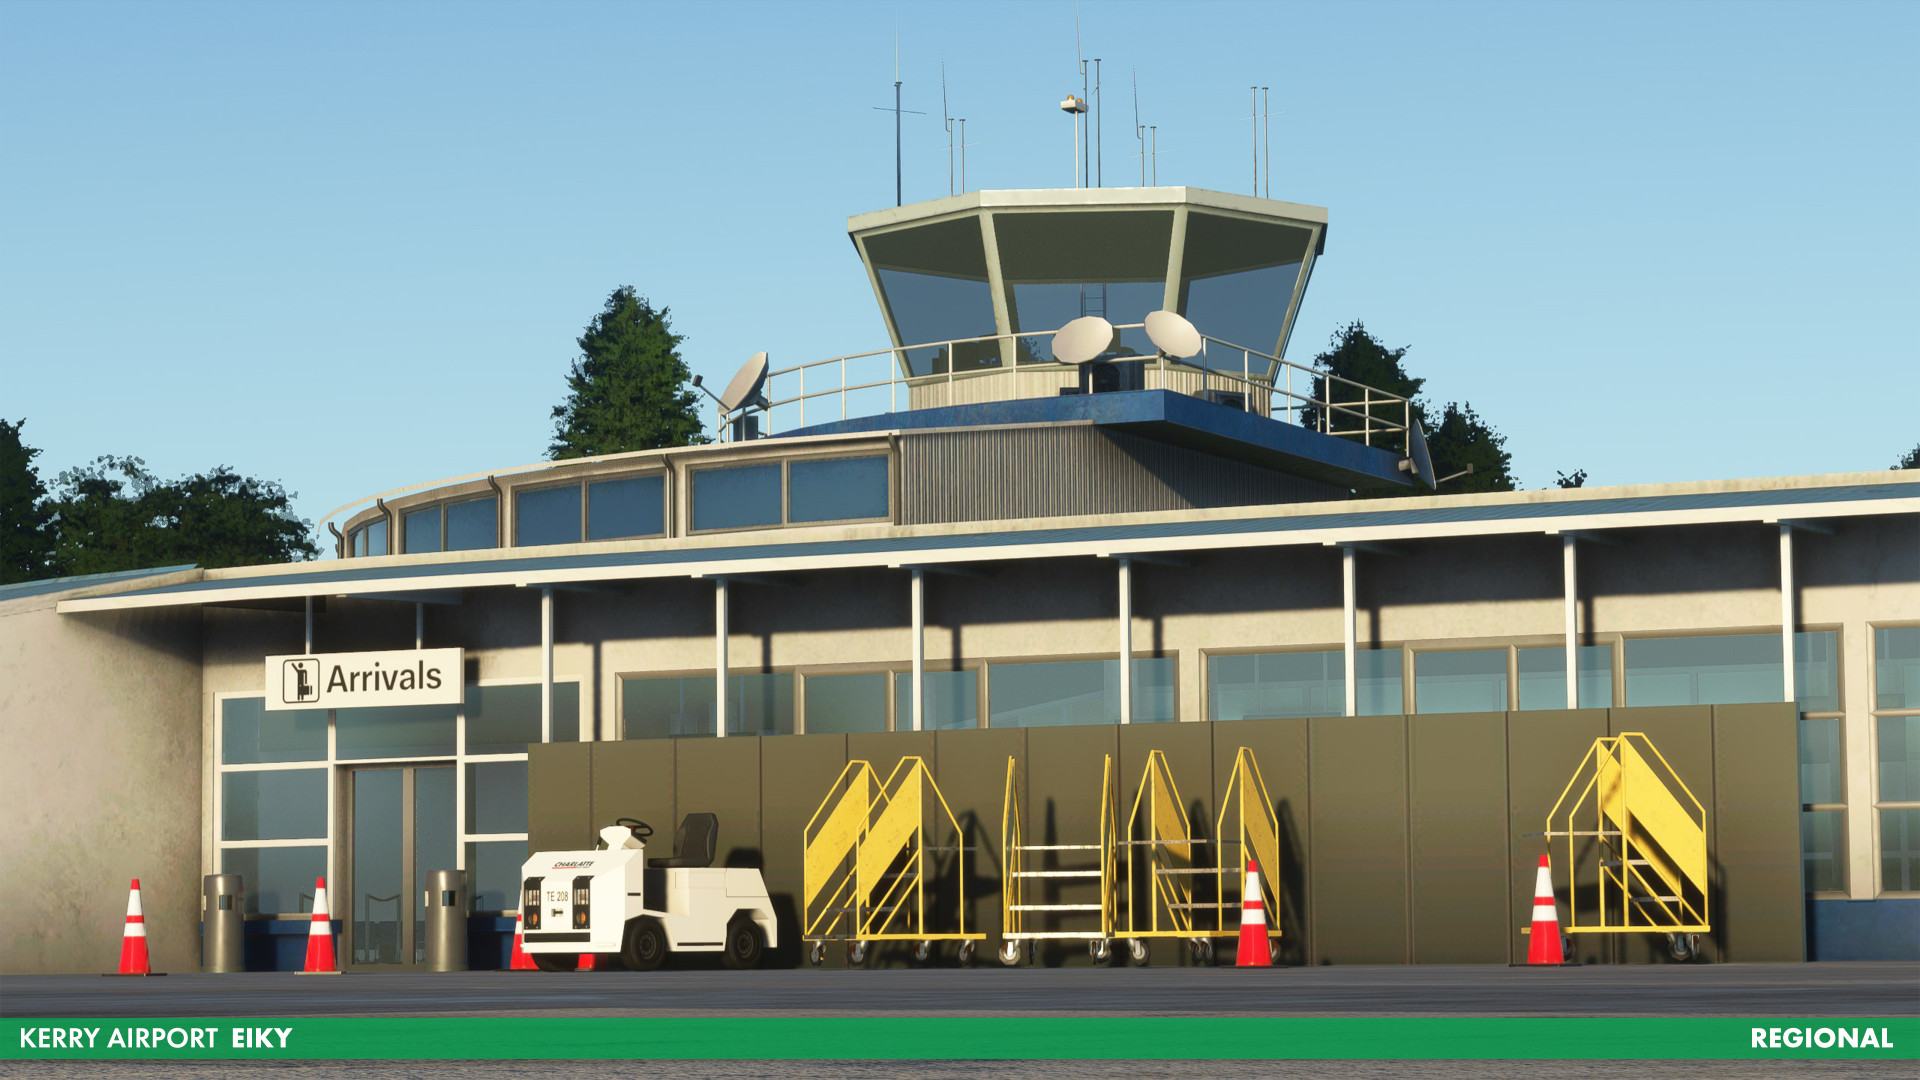 iniBuilds Releases Kerry Airport for MSFS - IniBuilds, Microsoft Flight Simulator